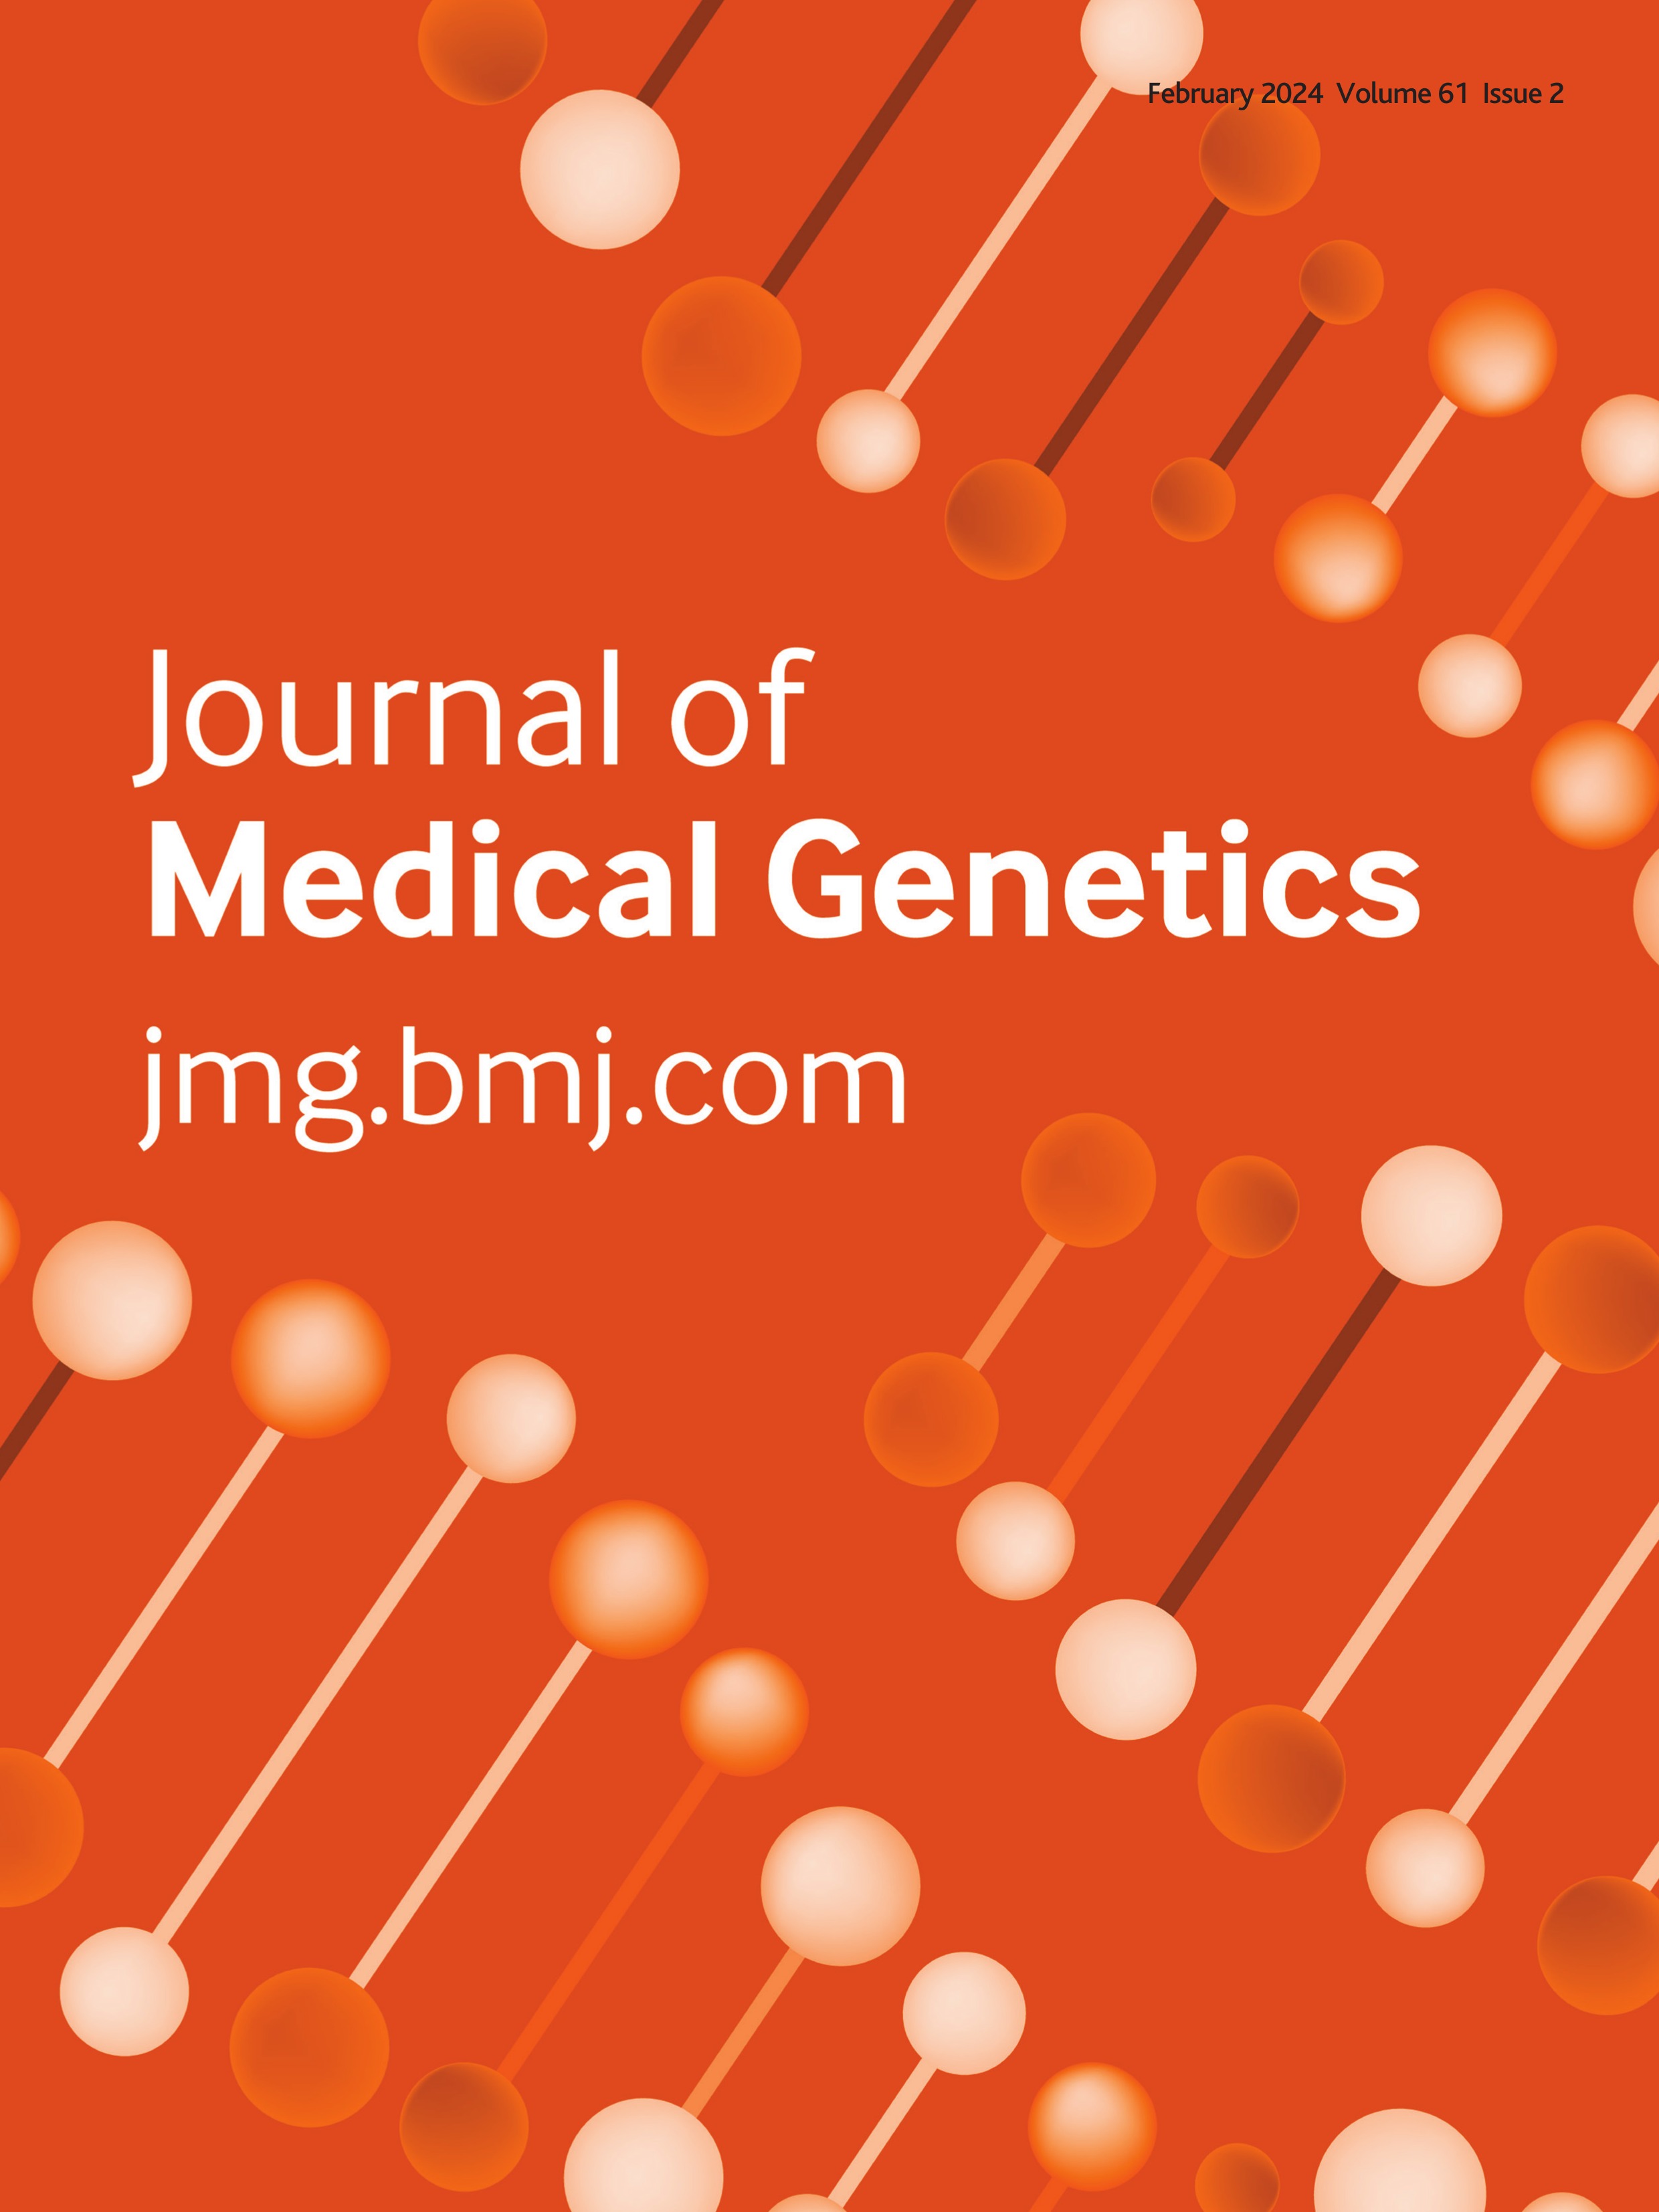 Diagnostic genome sequencing improves diagnostic yield: a prospective single-centre study in 1000 patients with inherited eye diseases